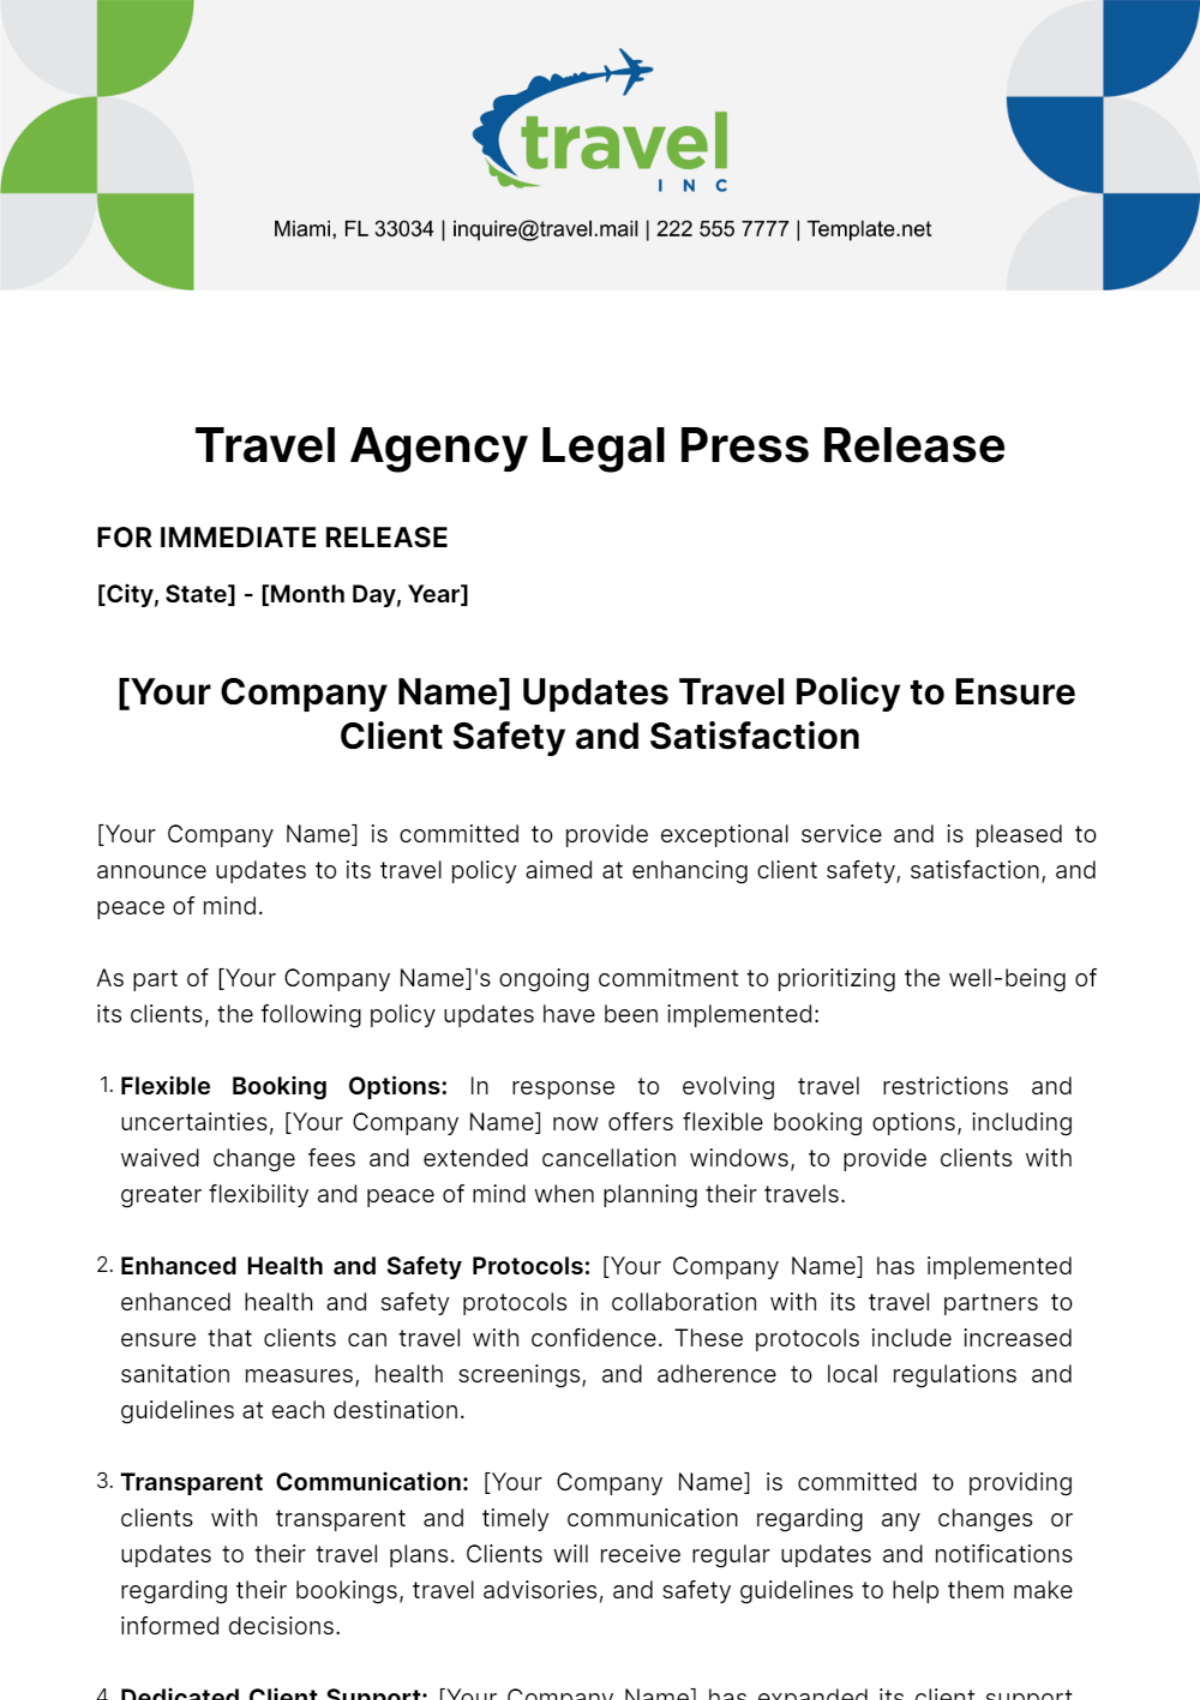 Free Travel Agency Legal Press Release Template